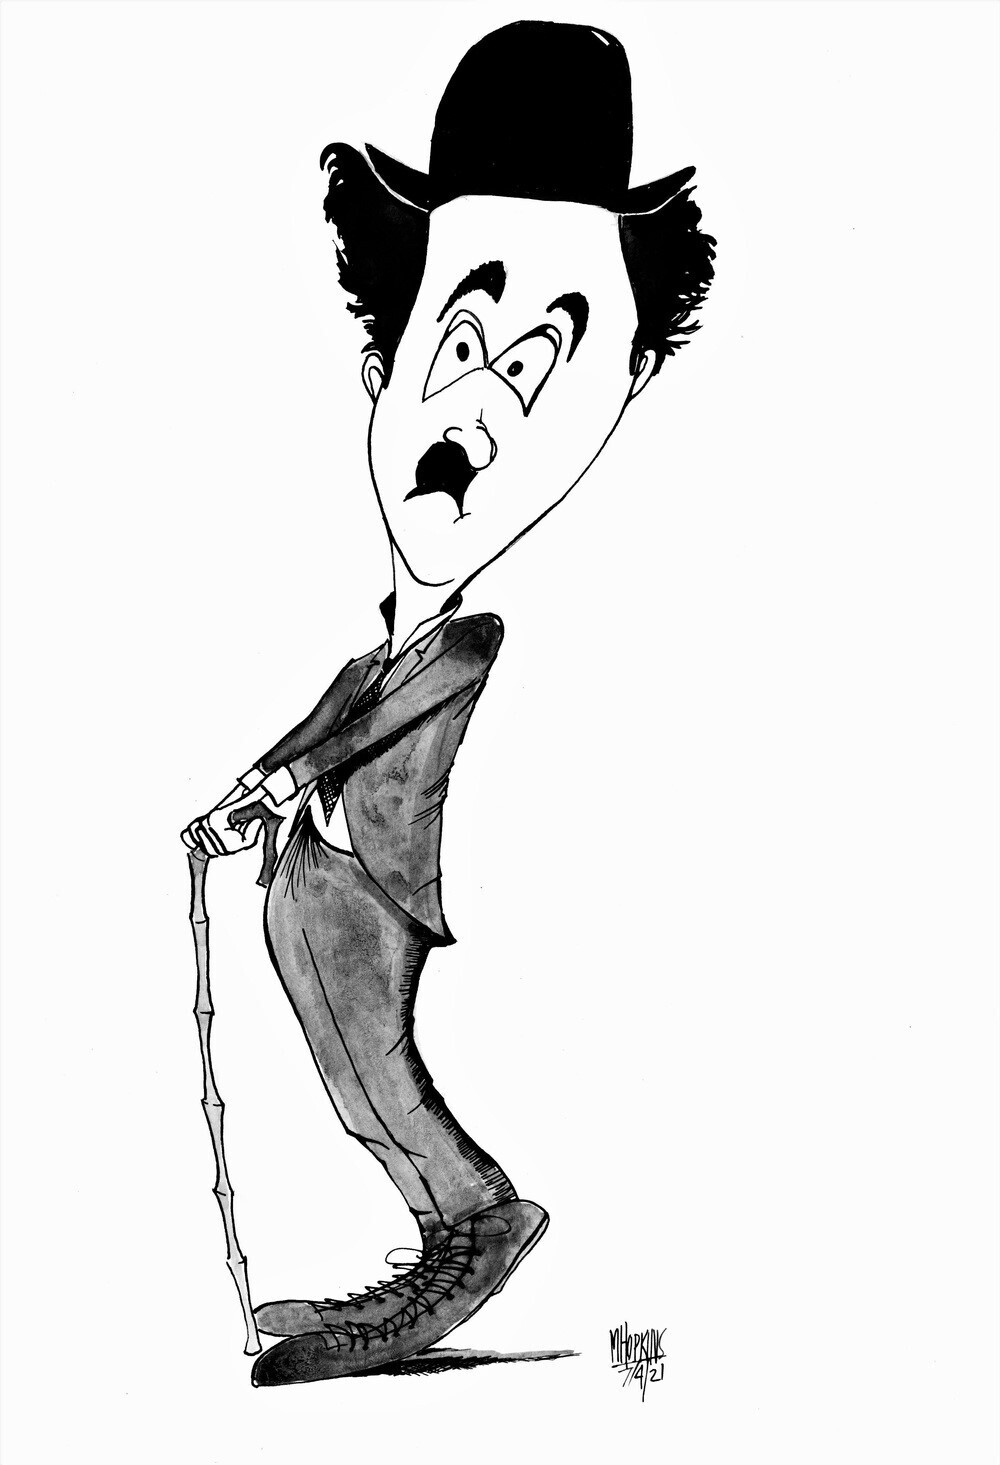 Charlie Chaplin 2 - Original 11"x 16" Pen and Ink Caricature by Michael Hopkins.